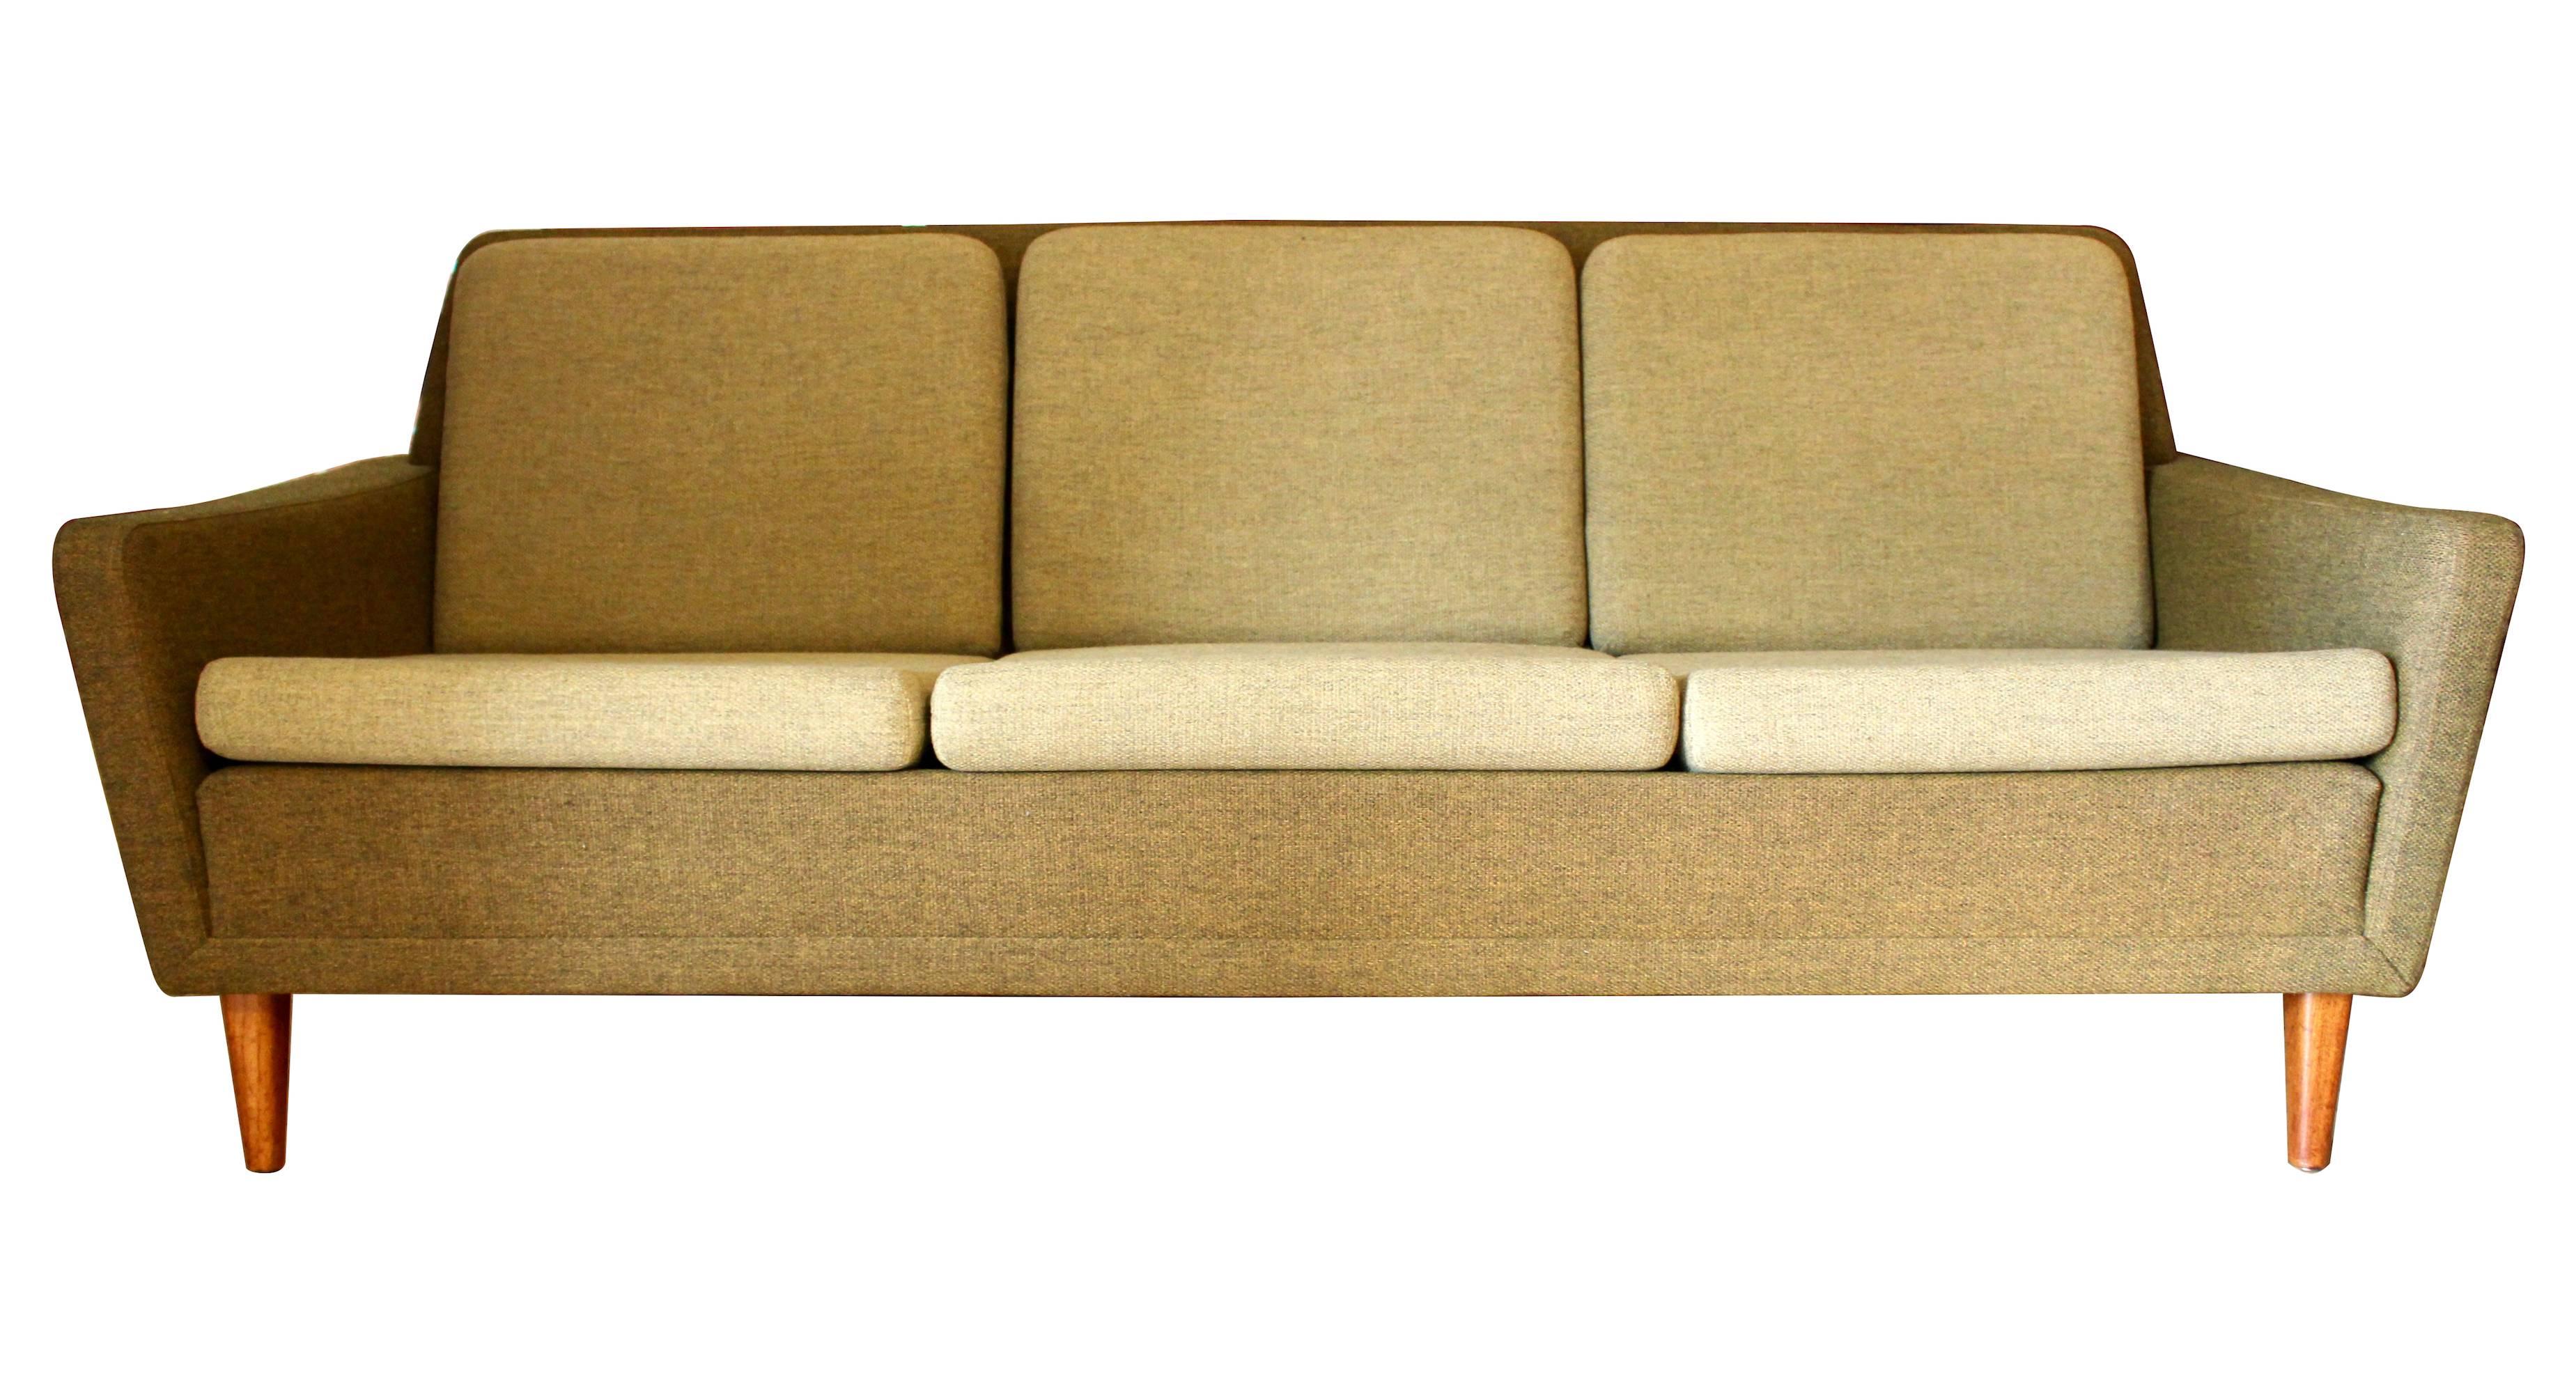 Swedish Upholstered Sofa by Folke Ohlsson for DUX, circa 1970